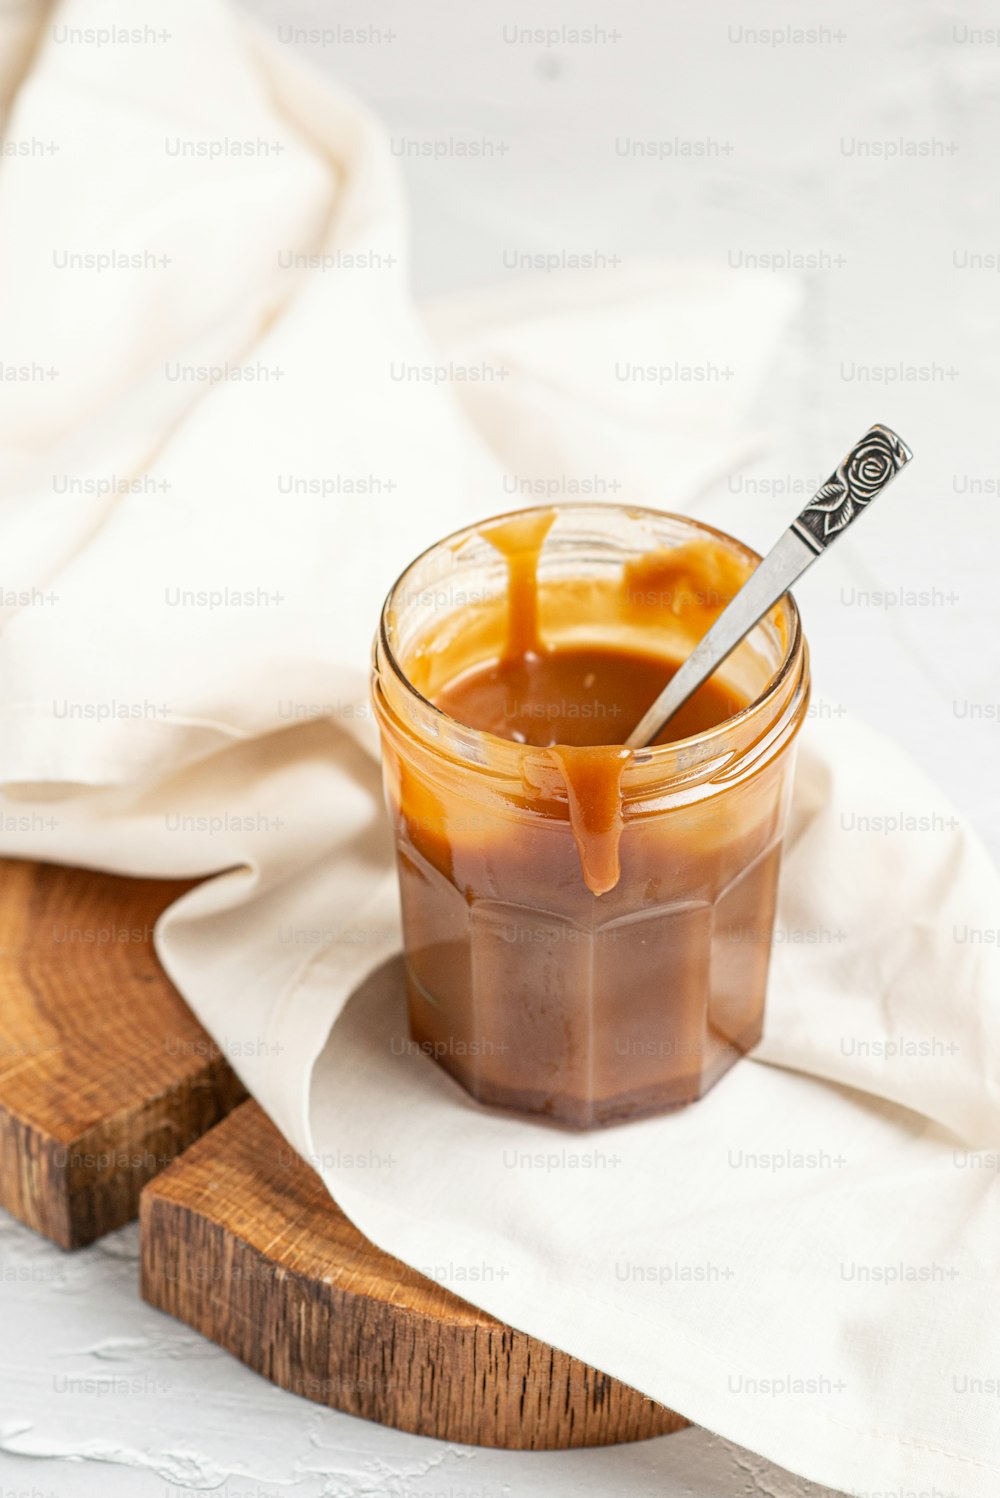 a jar of caramel sauce with a spoon in it